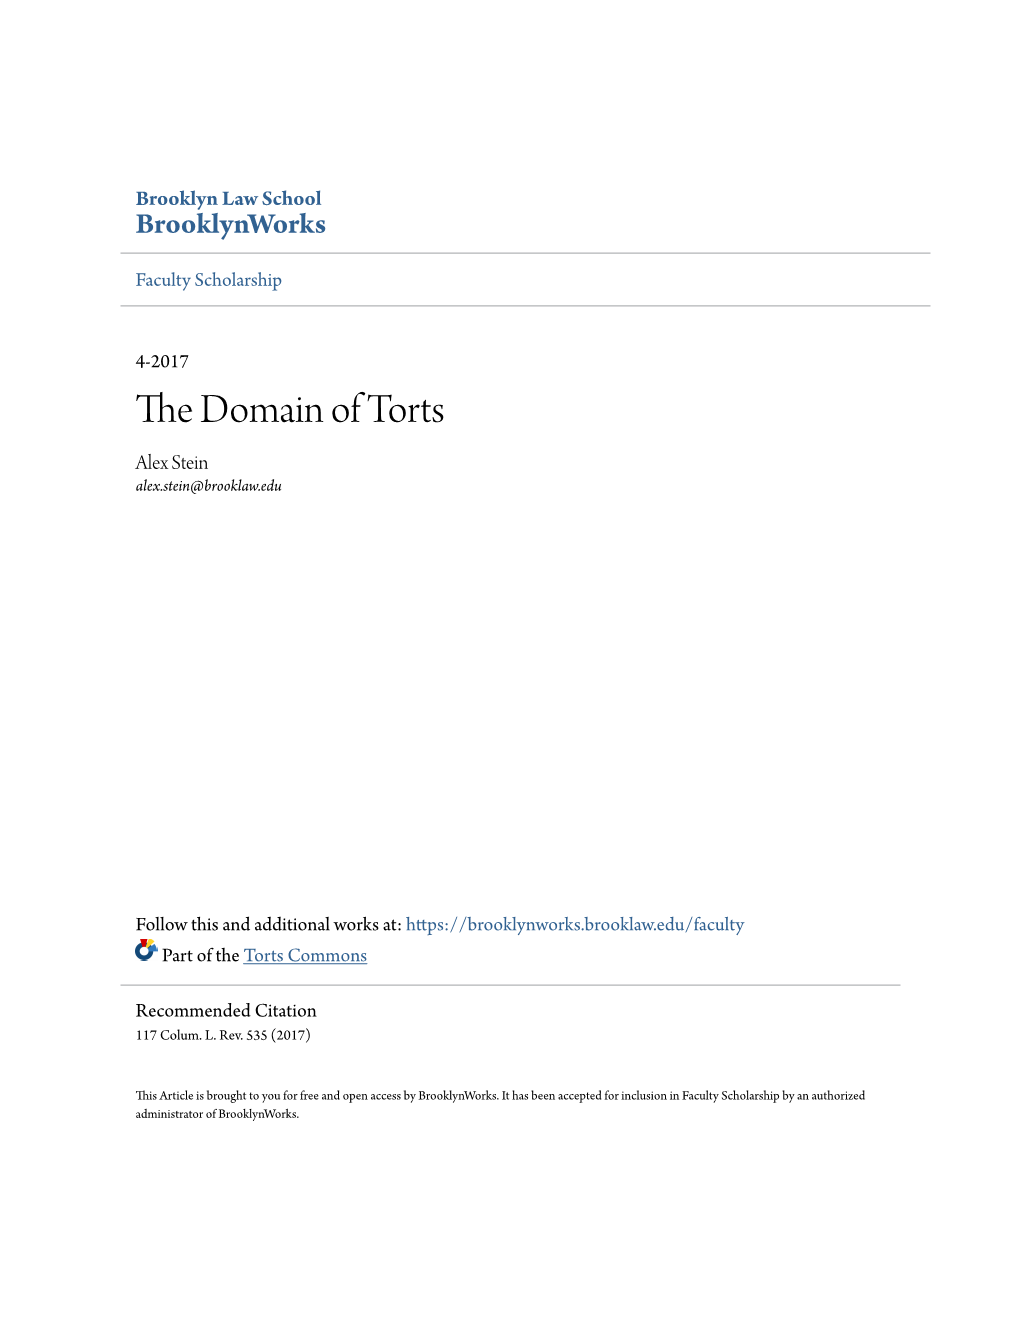 The Domain of Torts